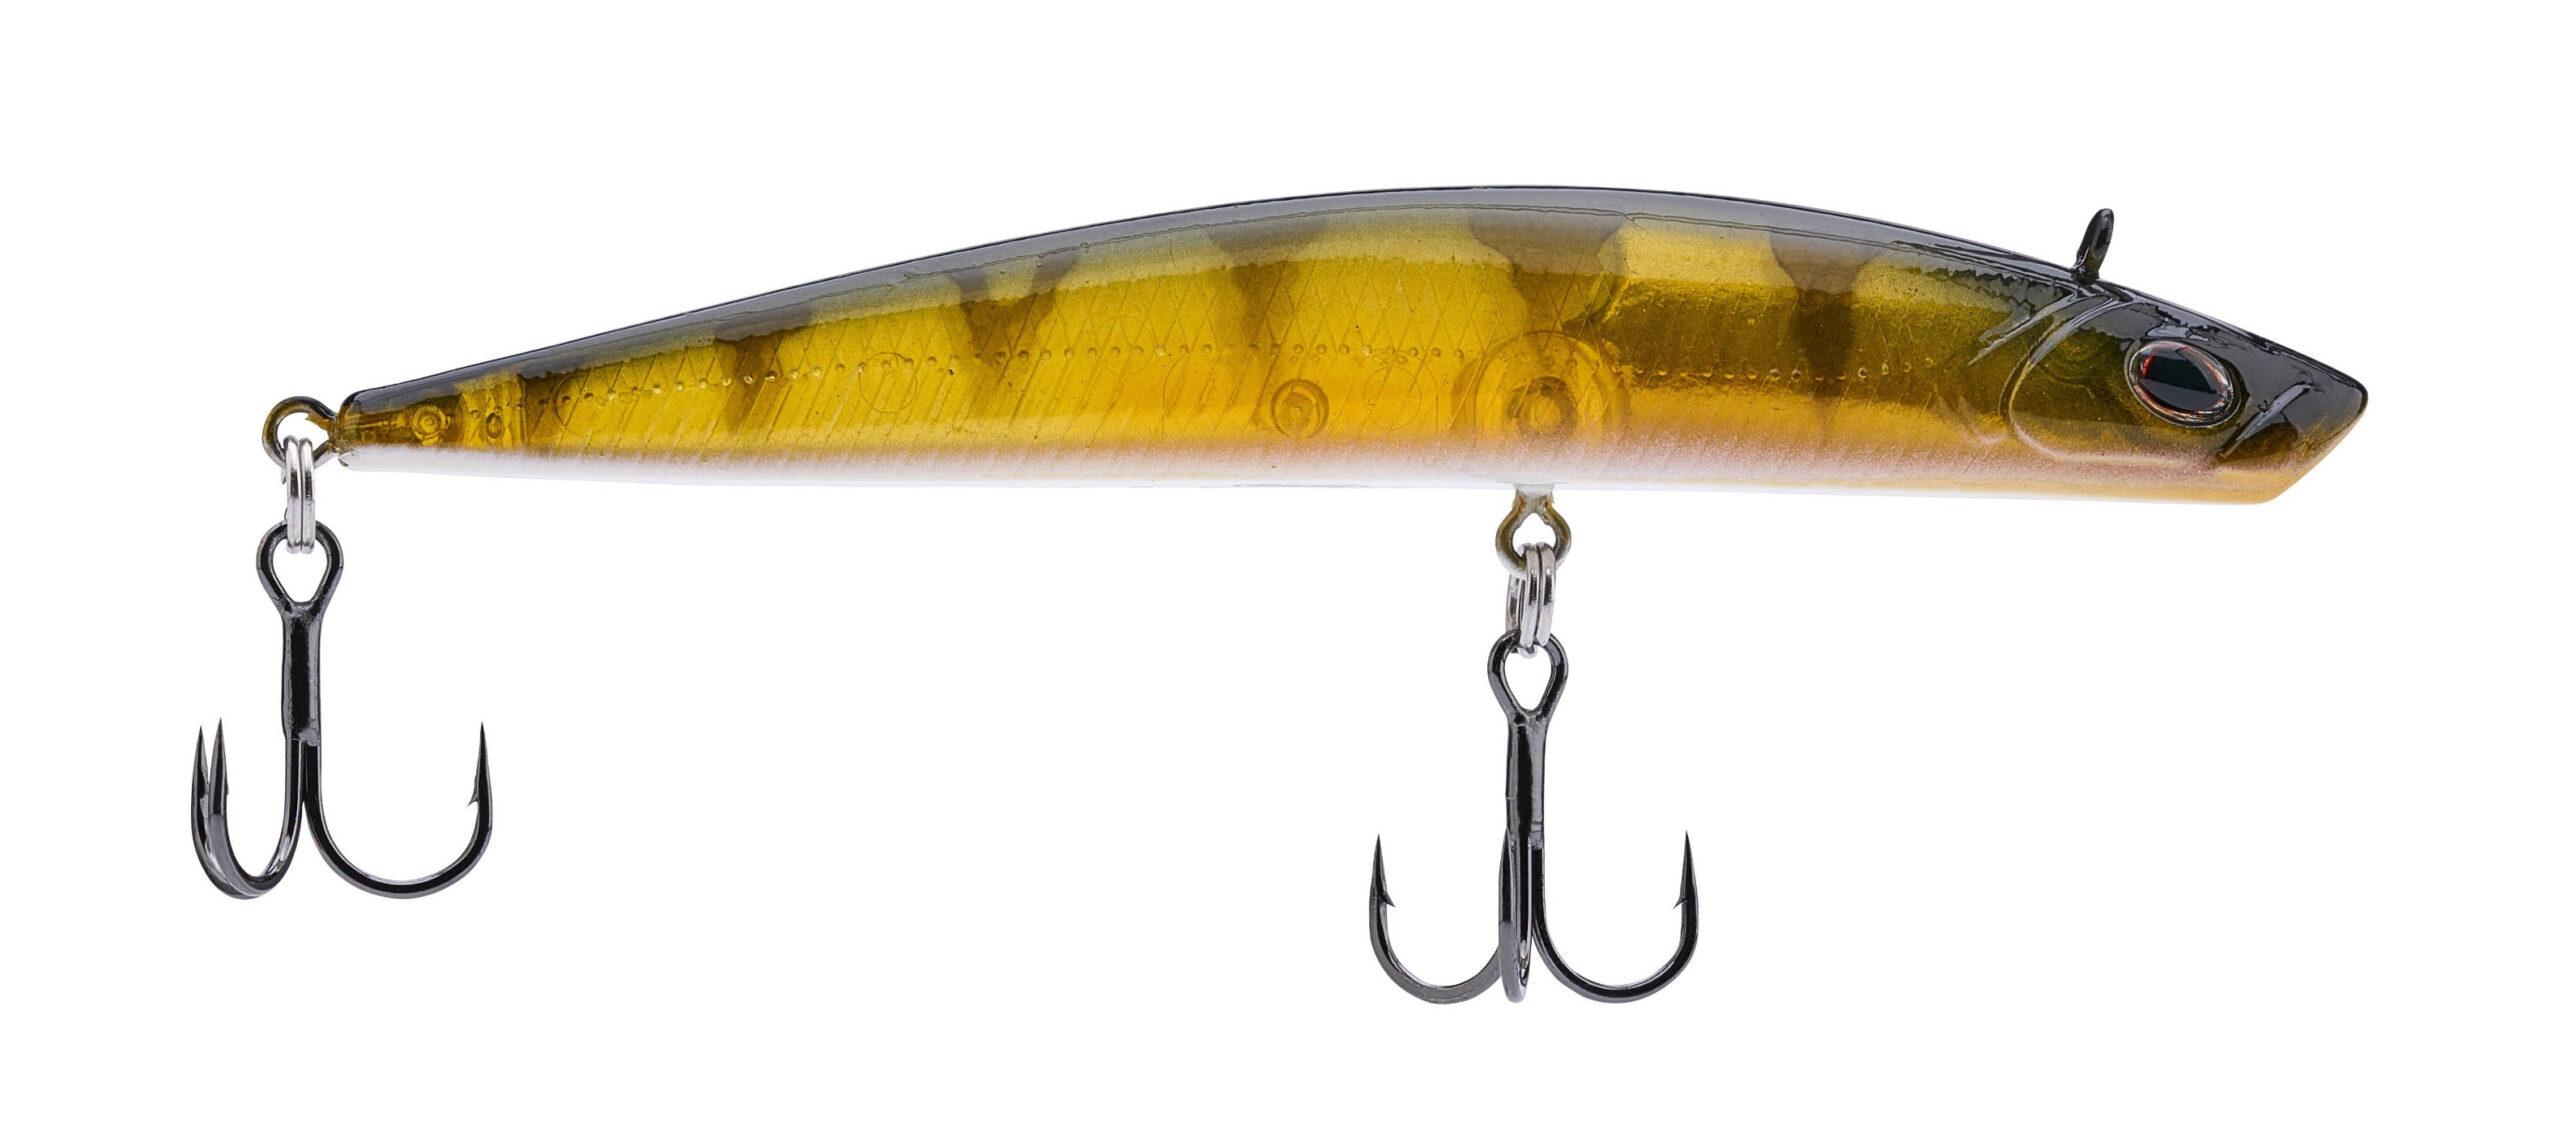 Berkley Finisher, Real Deal Tackle